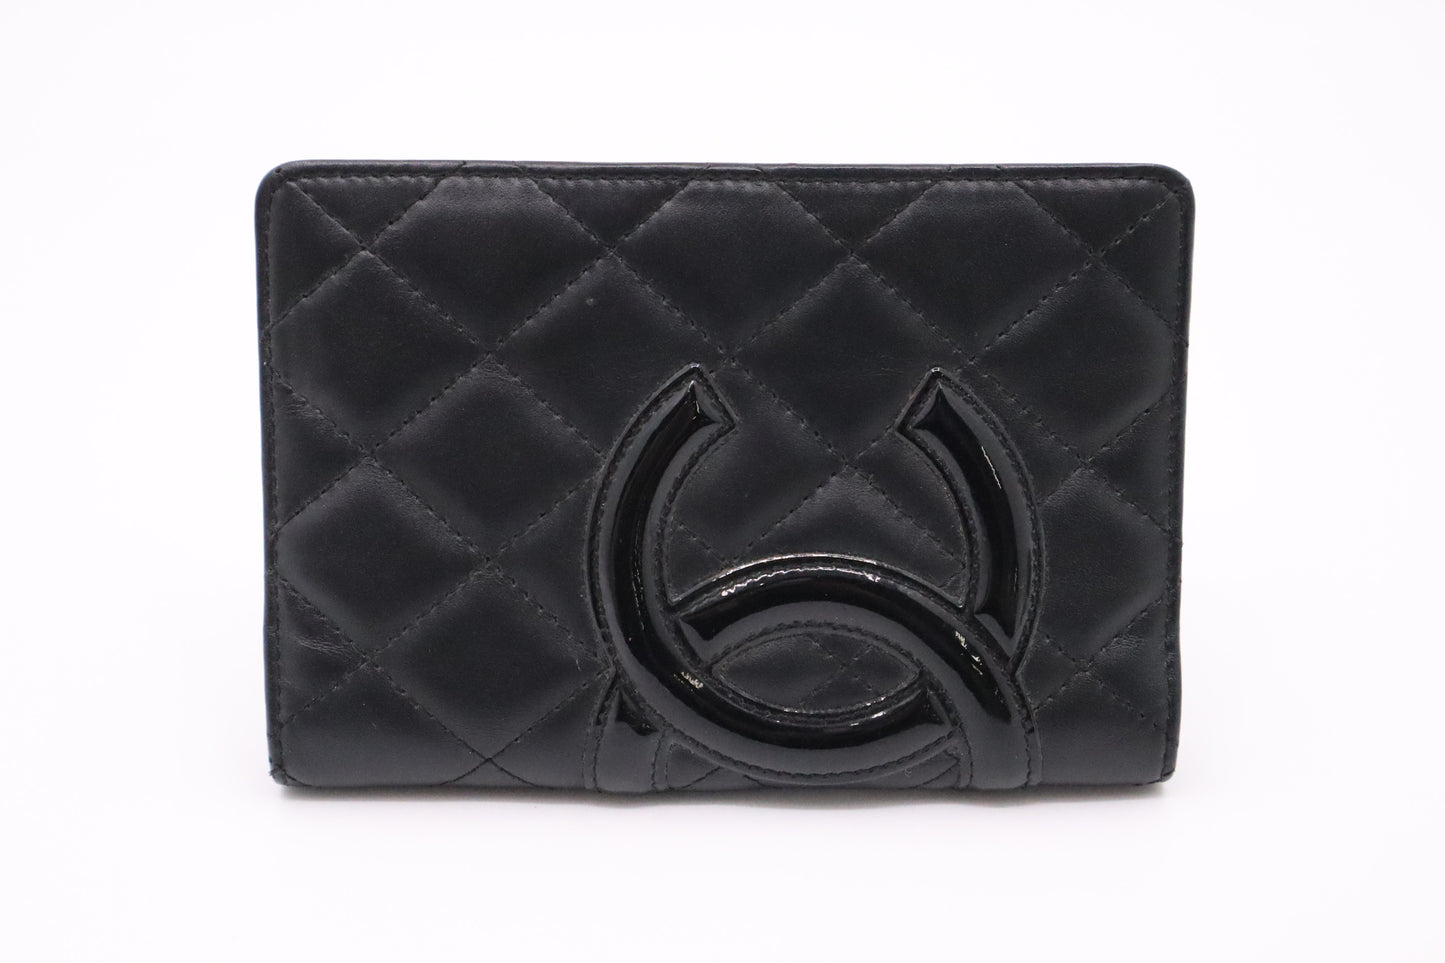 Chanel Cambon Passport Case in Black Leather